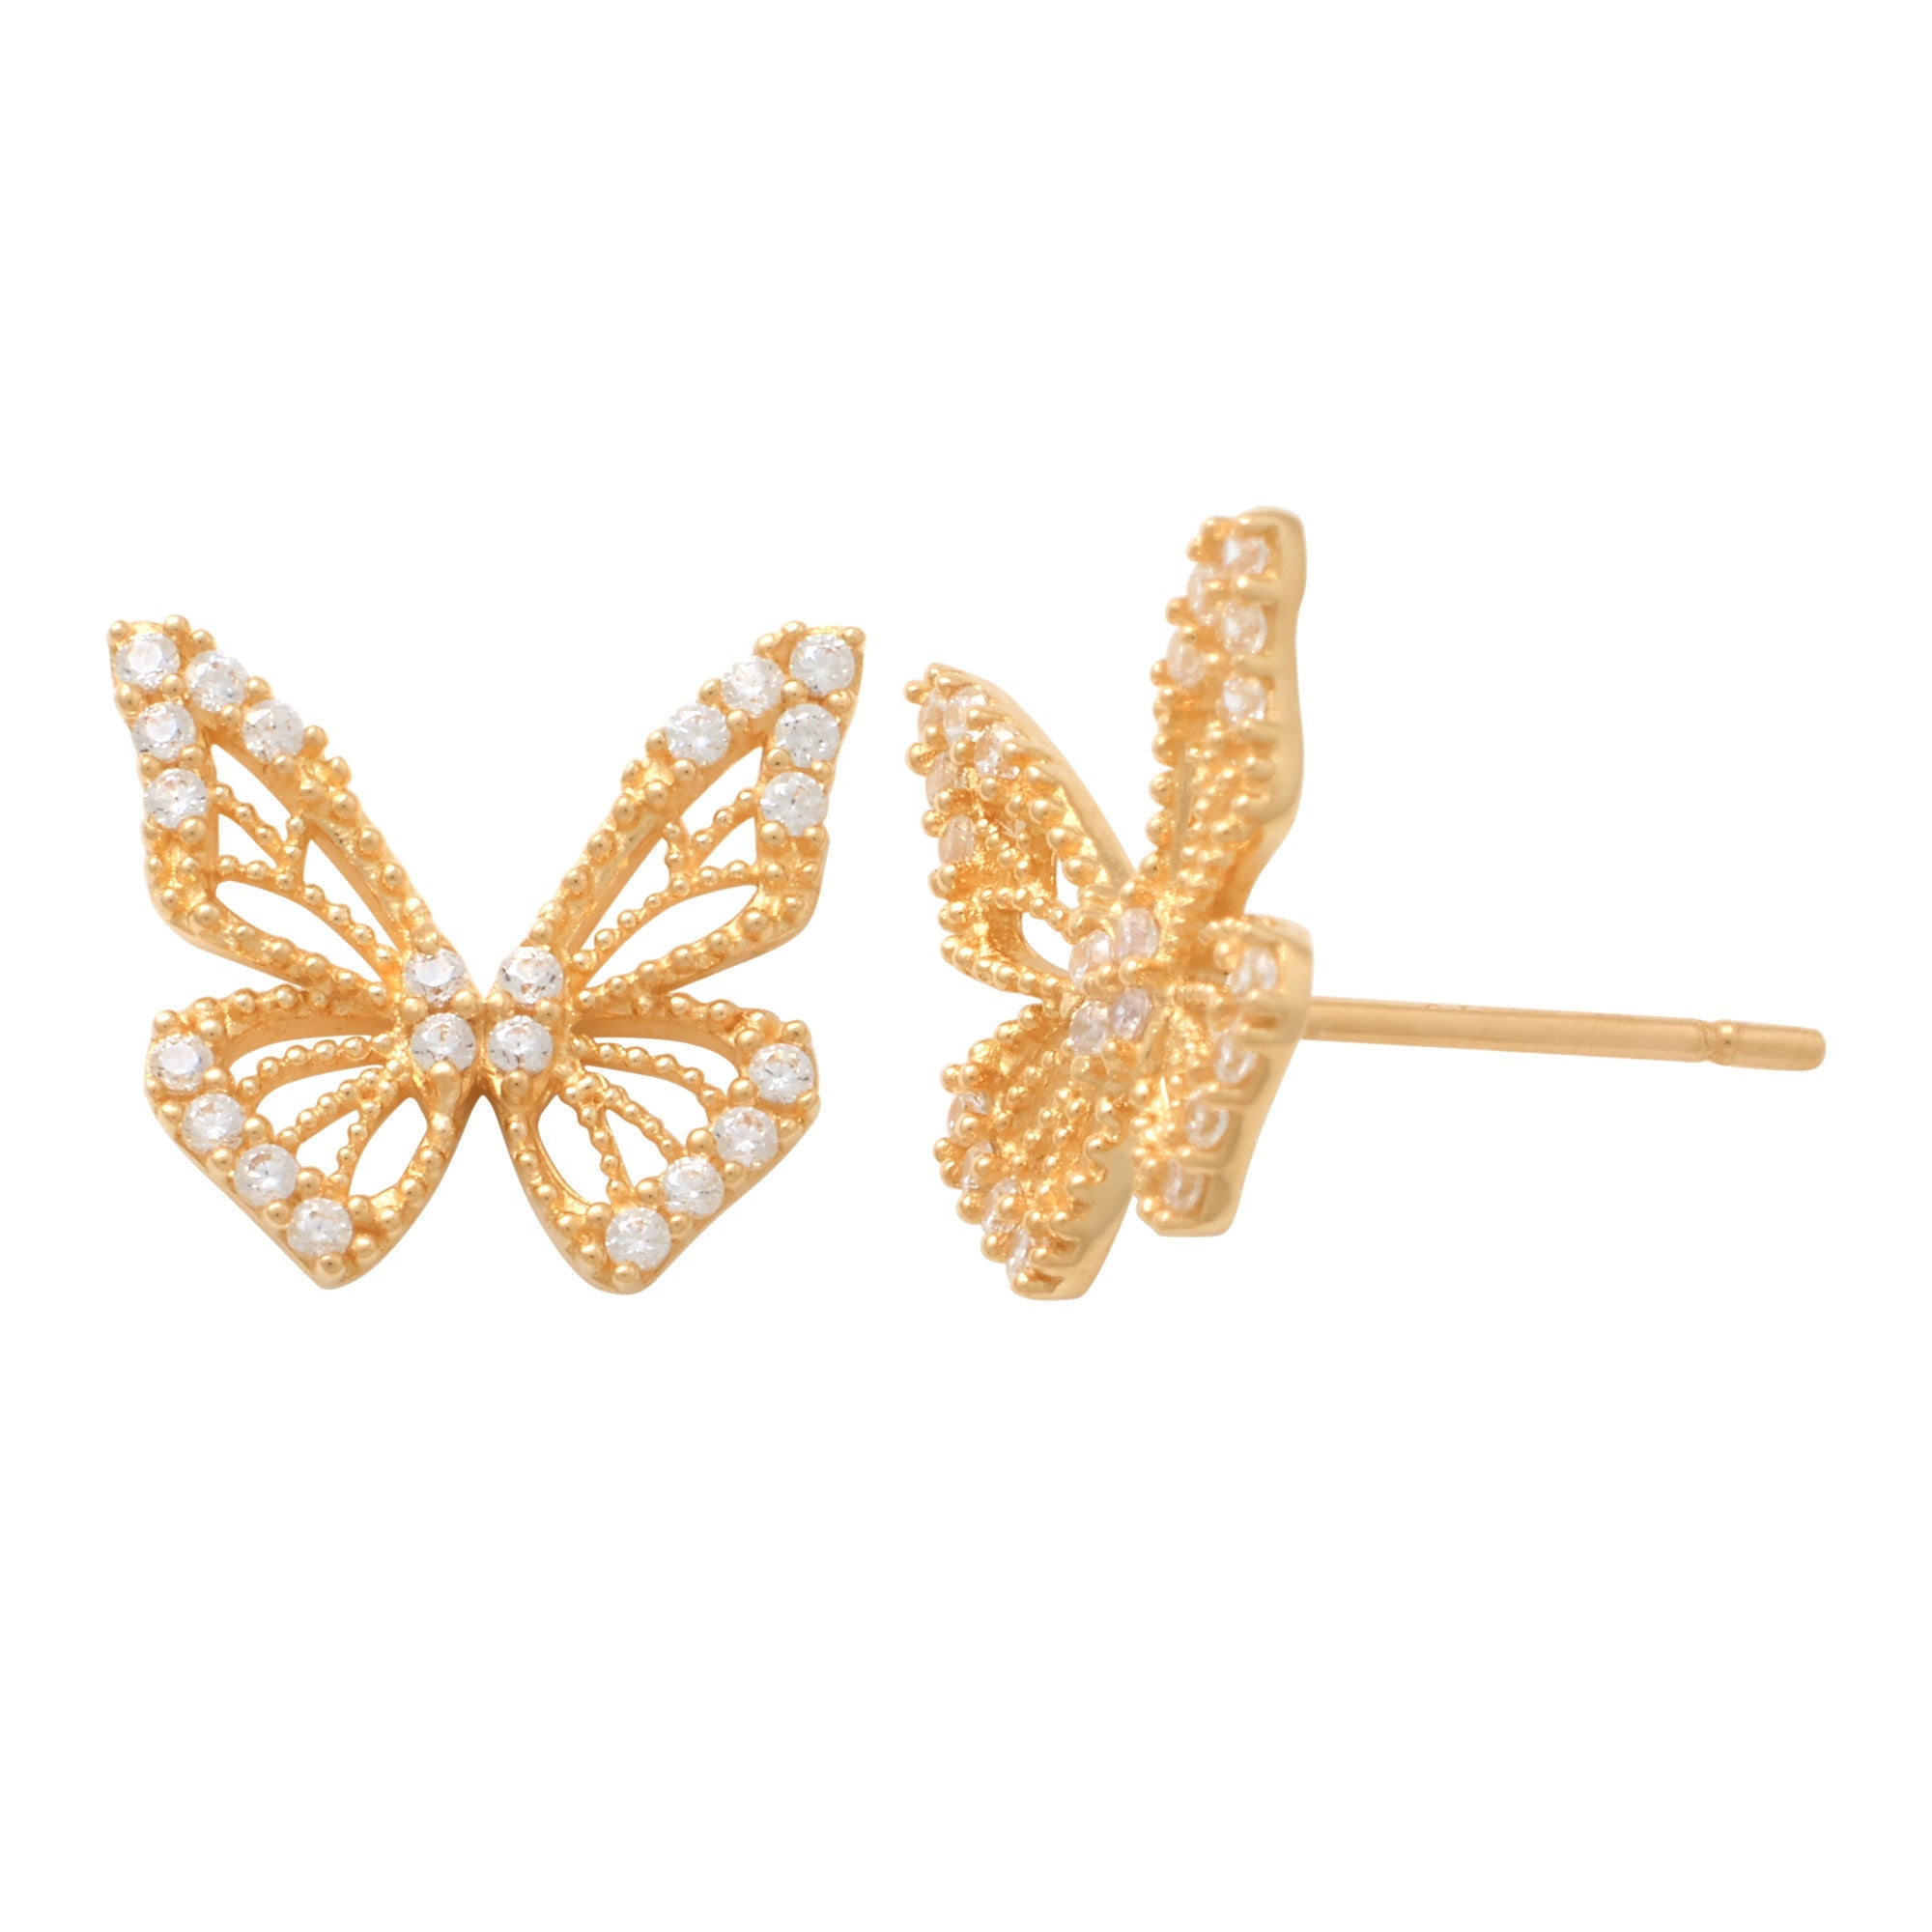 14K Solid Gold Medium CZ Butterfly Stud Earrings - Anygolds 